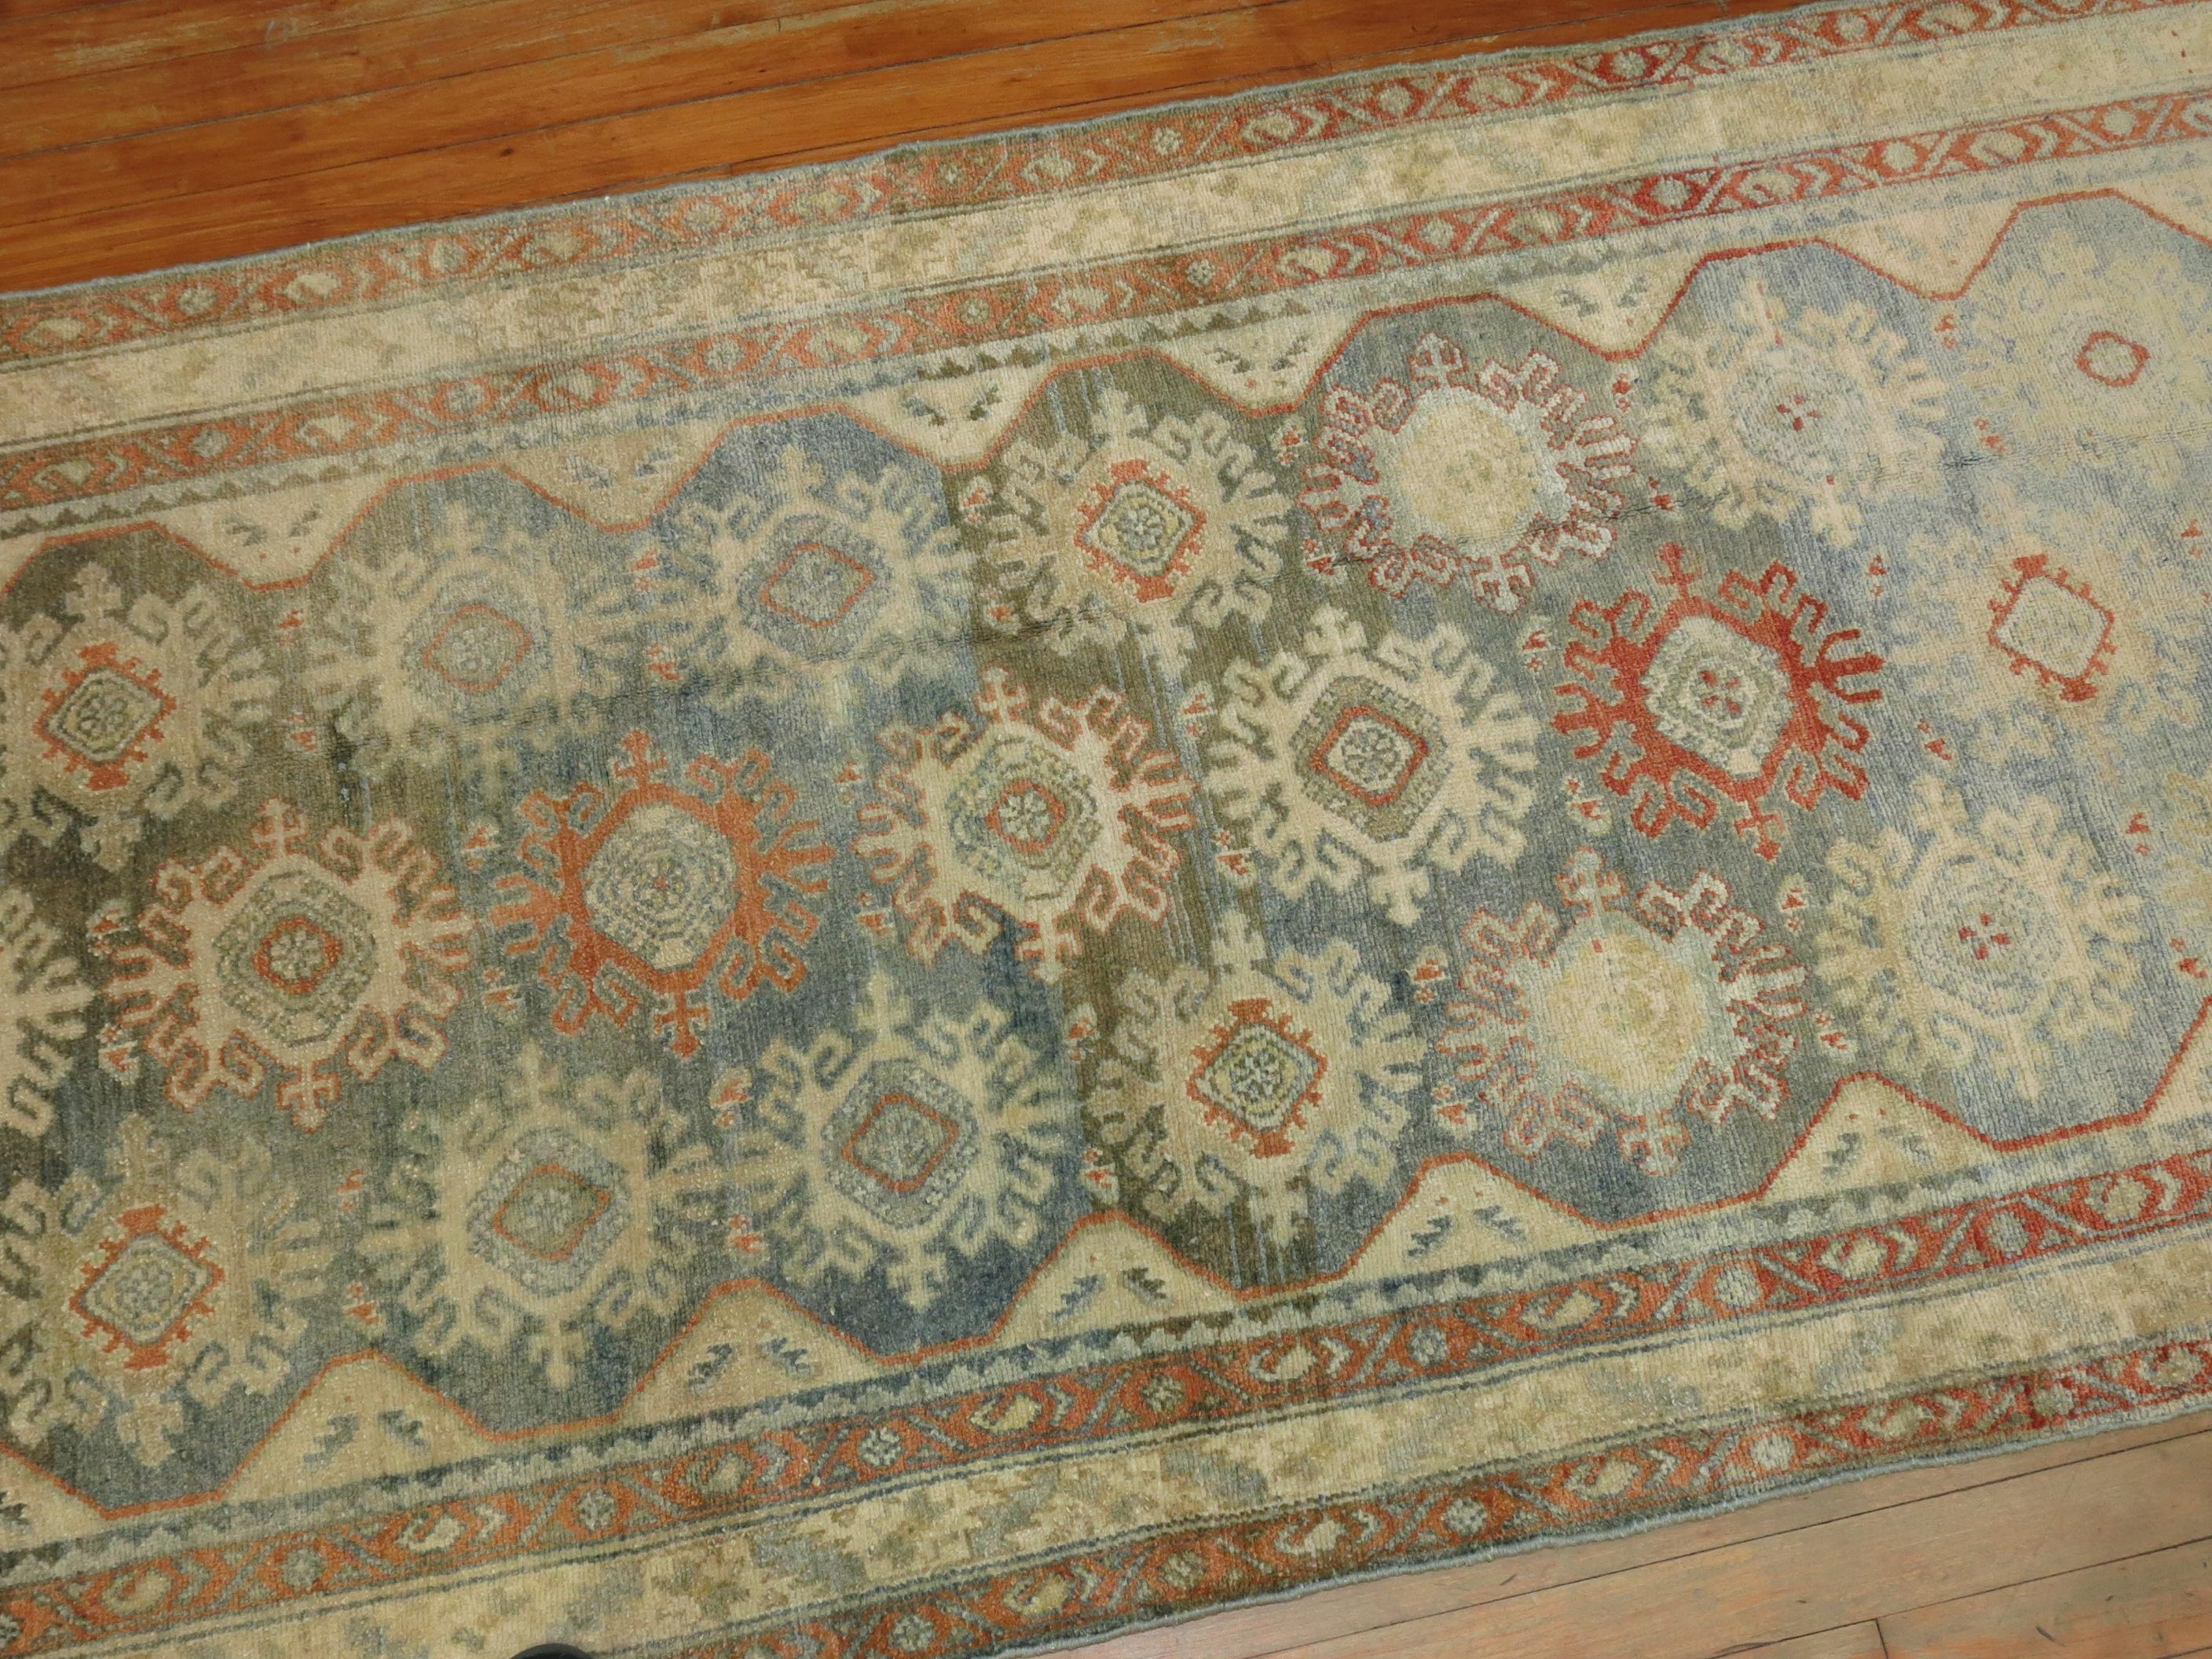 Predominant soft gray-blue and terracotta Persian Malayer Runner from the early 20th century.

Measures: 3'4